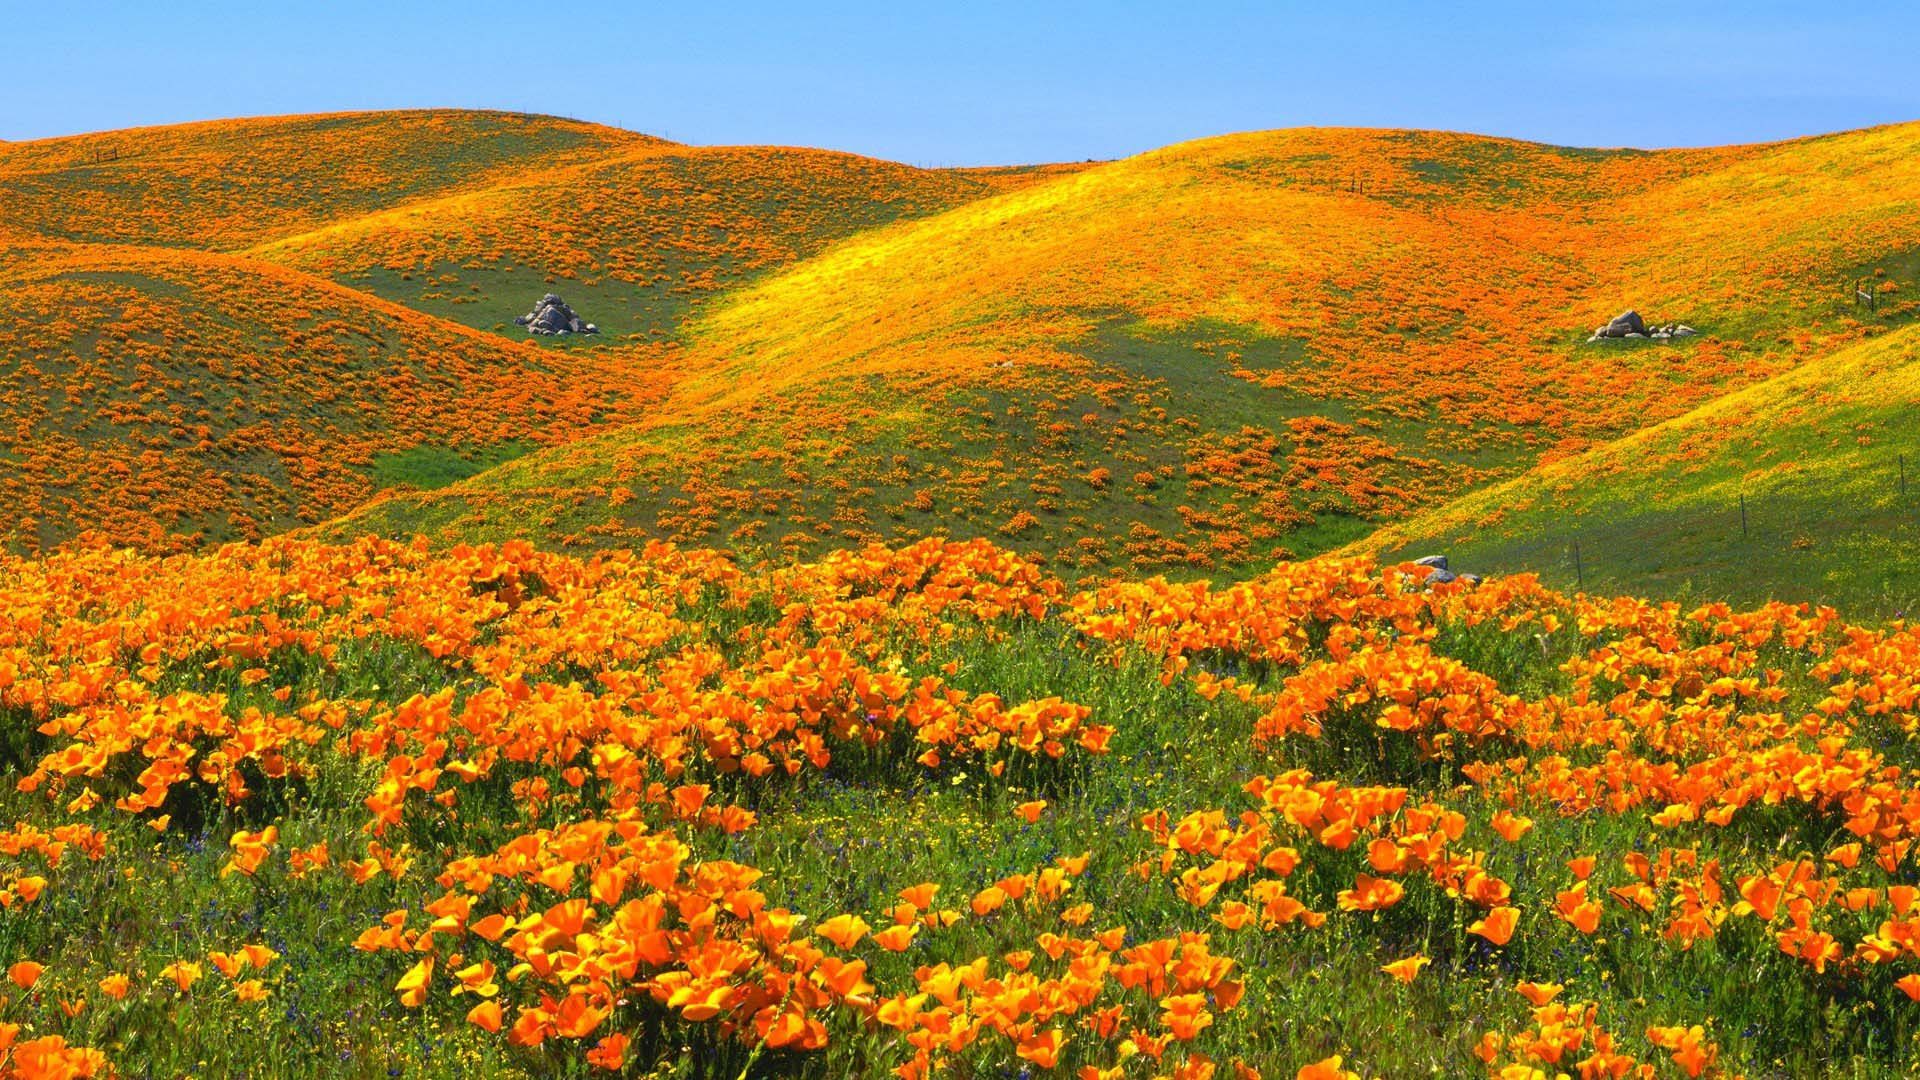 Spring Landscape Hills With Yellow Color Of Poppies